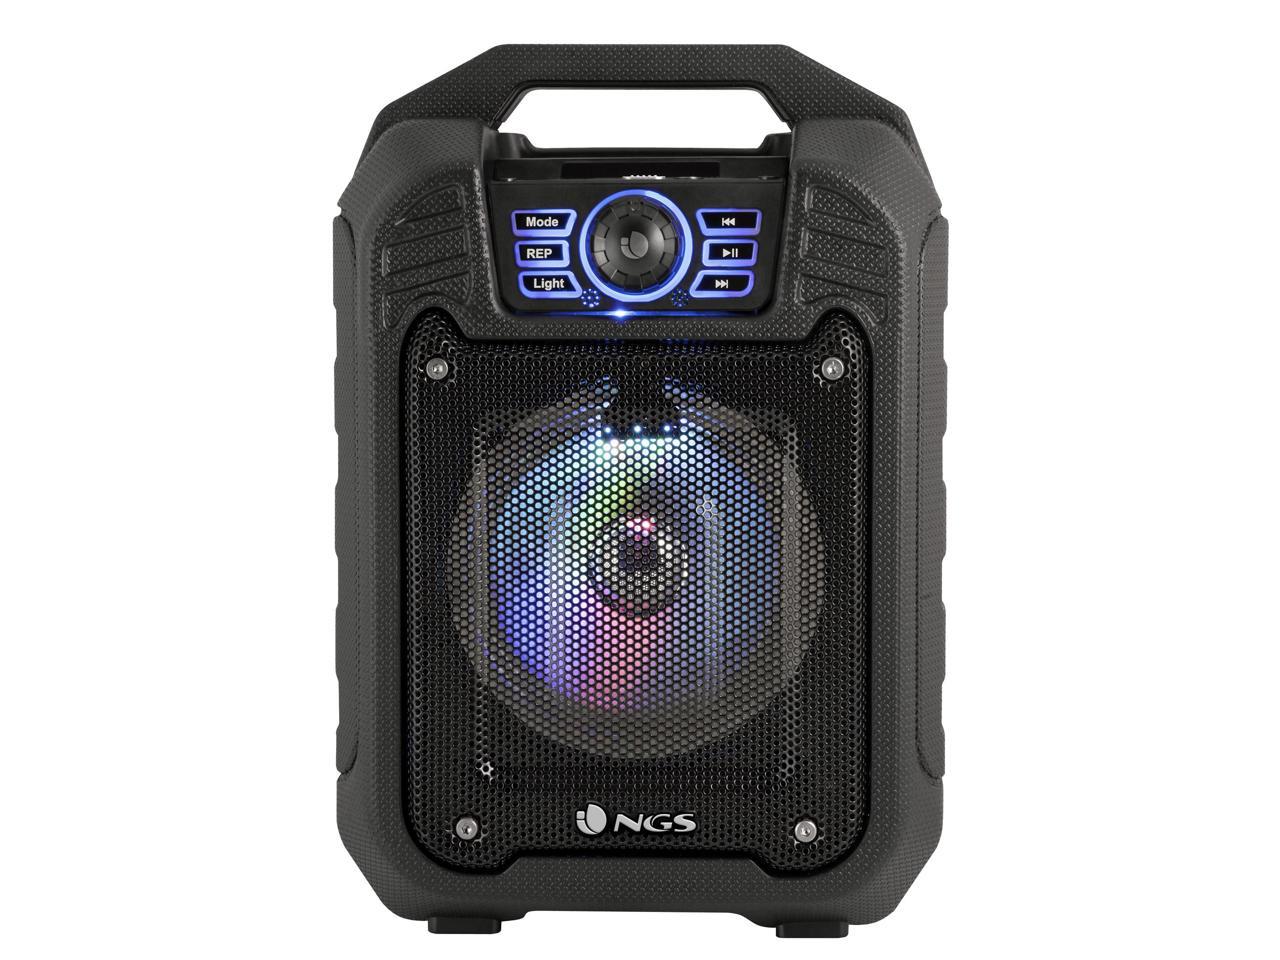 NGS Roller Tin 20W Bluetooth Speaker with FM Radio, USB Port, Aux Input and MicroSD Slot